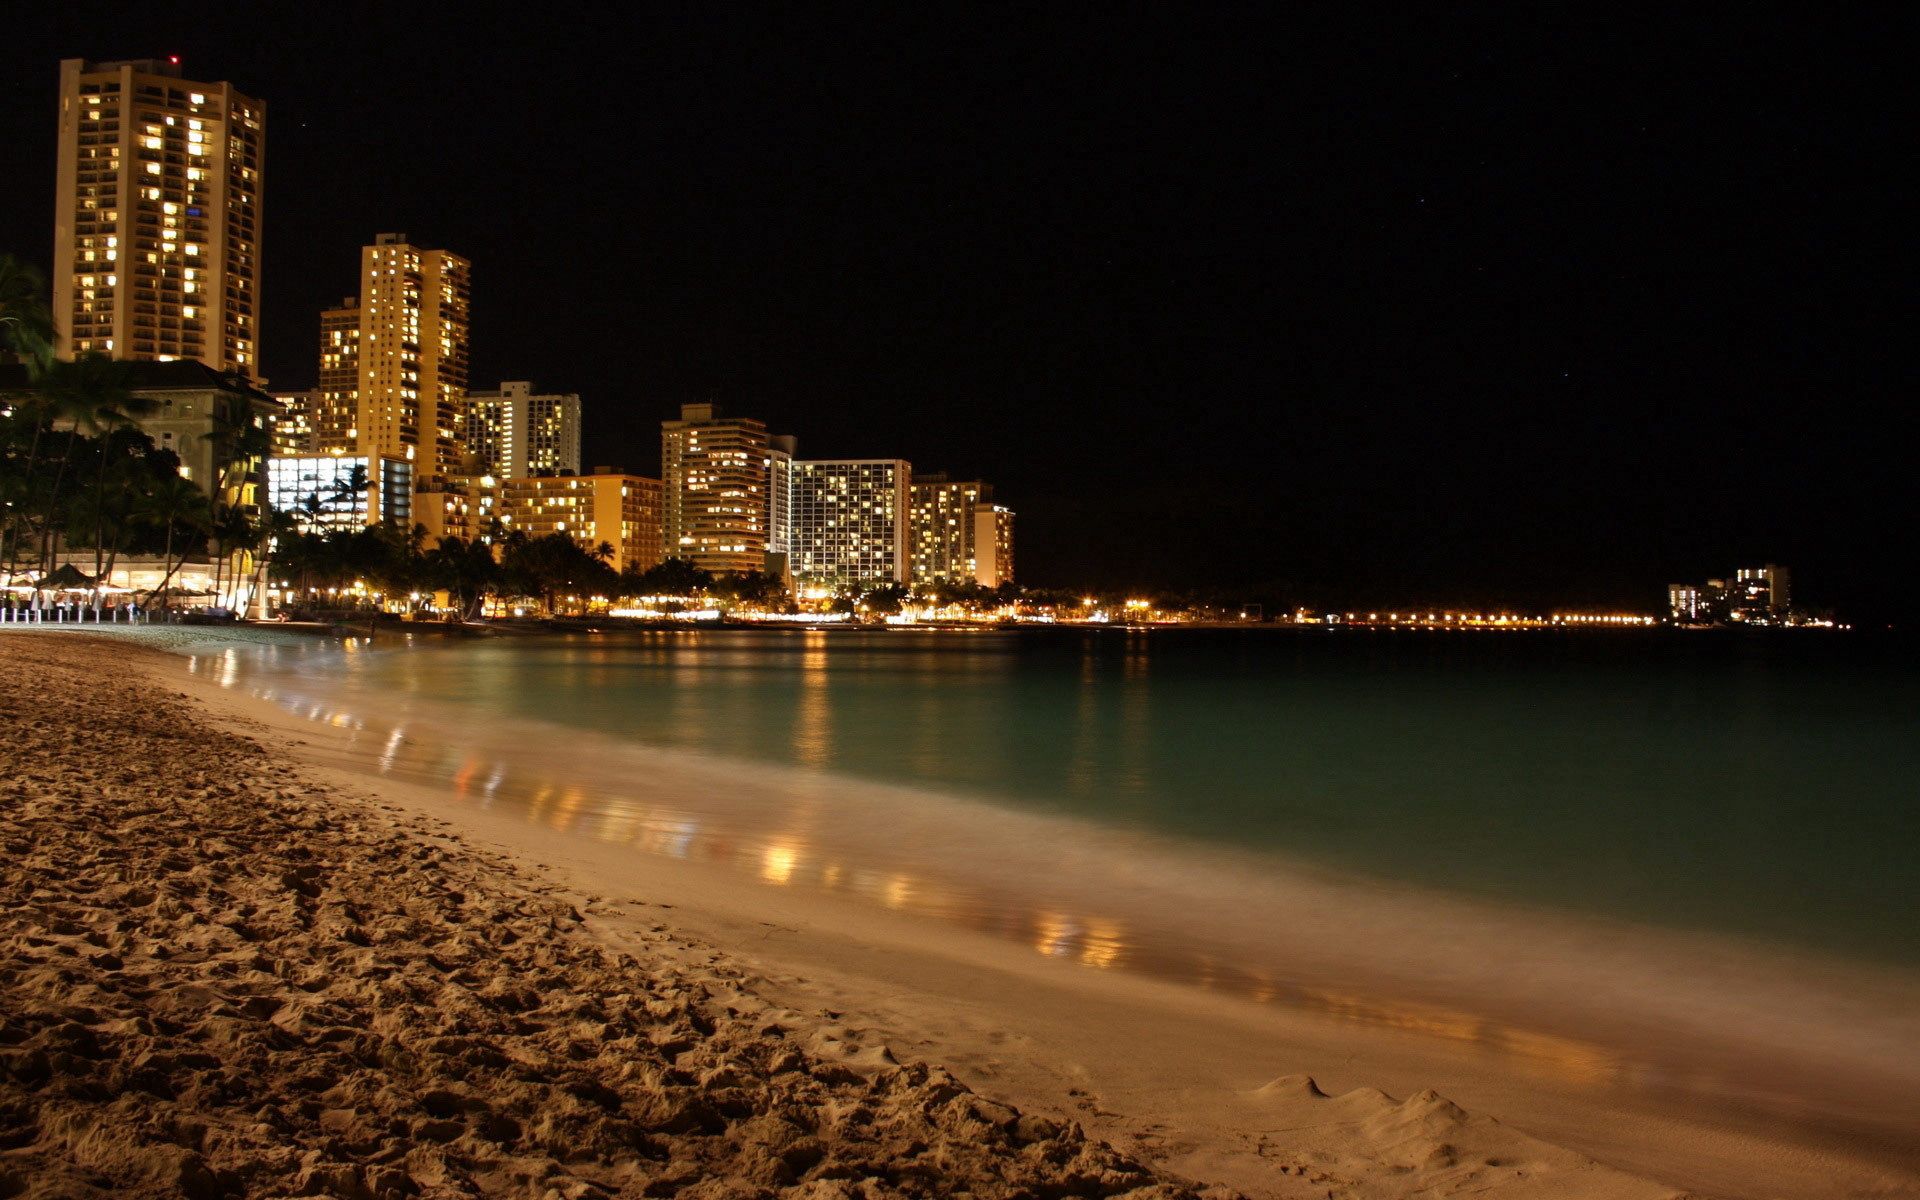 138595 download wallpaper cities, beach, romance, night coast screensavers and pictures for free